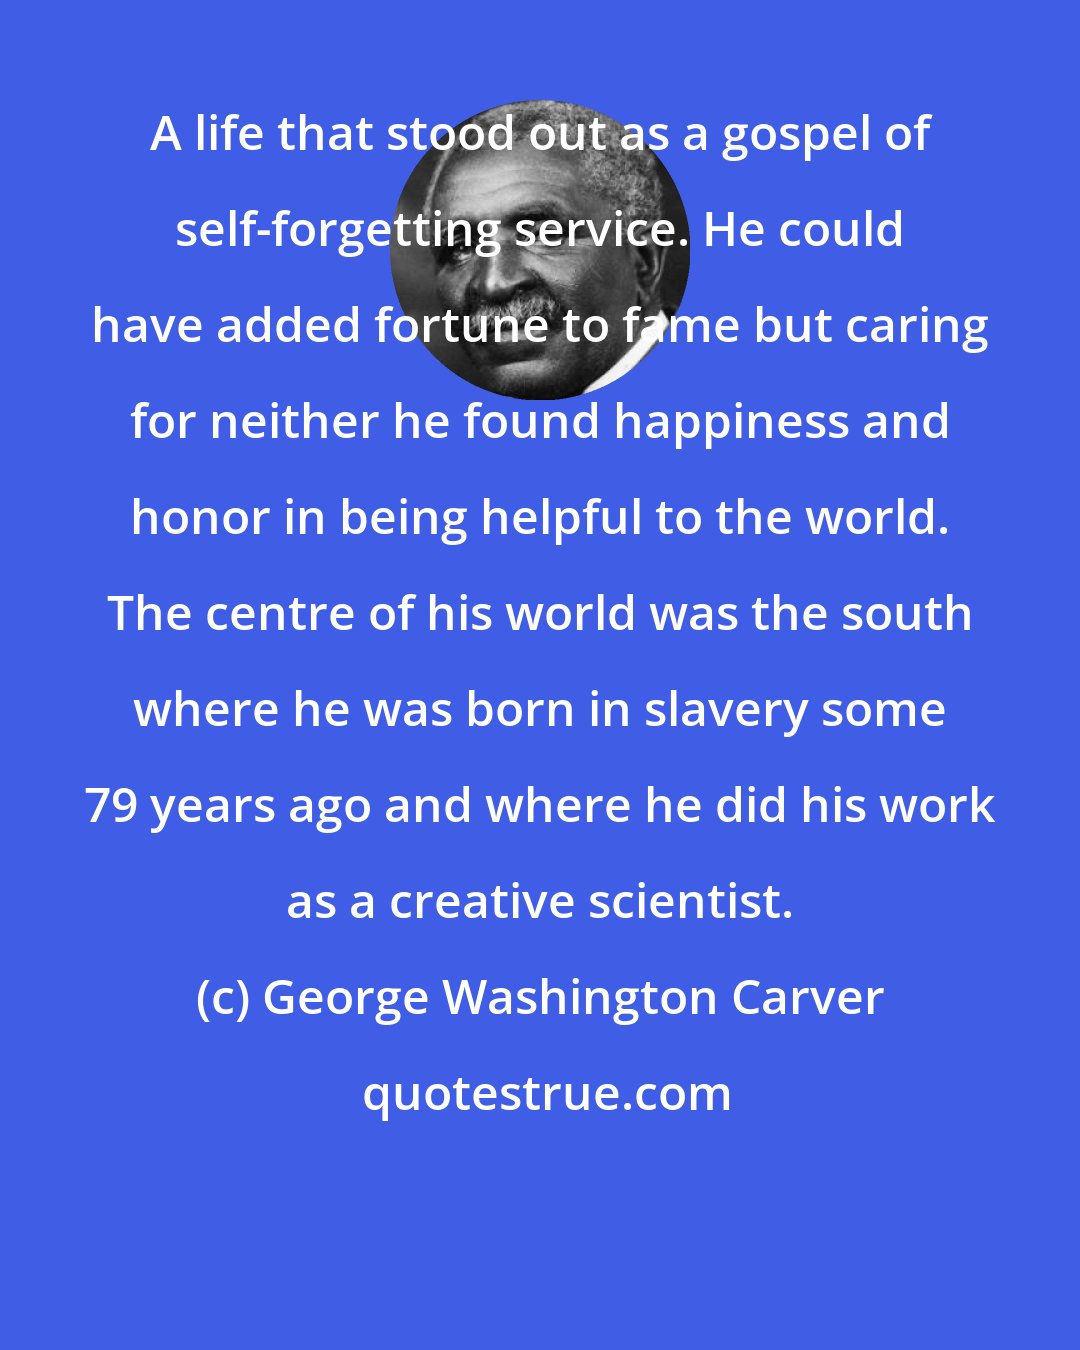 George Washington Carver: A life that stood out as a gospel of self-forgetting service. He could have added fortune to fame but caring for neither he found happiness and honor in being helpful to the world. The centre of his world was the south where he was born in slavery some 79 years ago and where he did his work as a creative scientist.